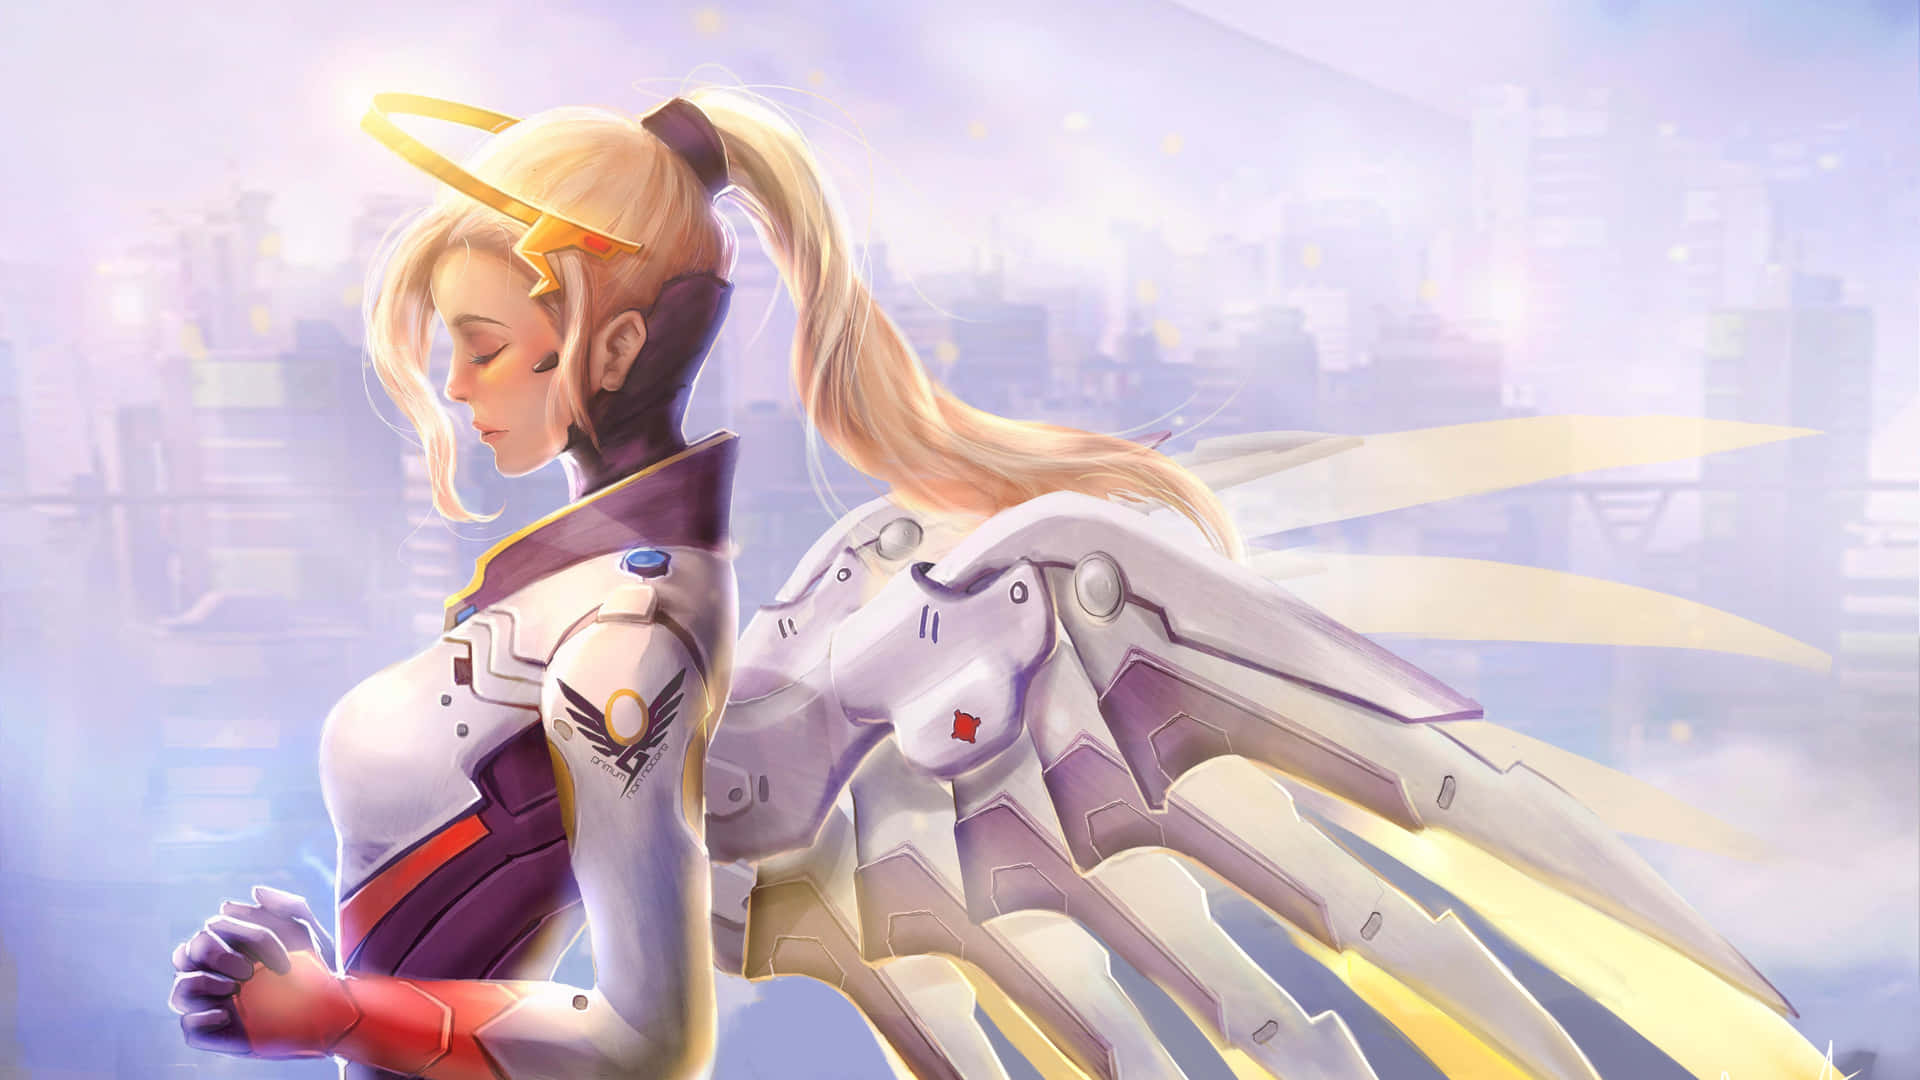 Soaring High - Overwatch Mercy In Action